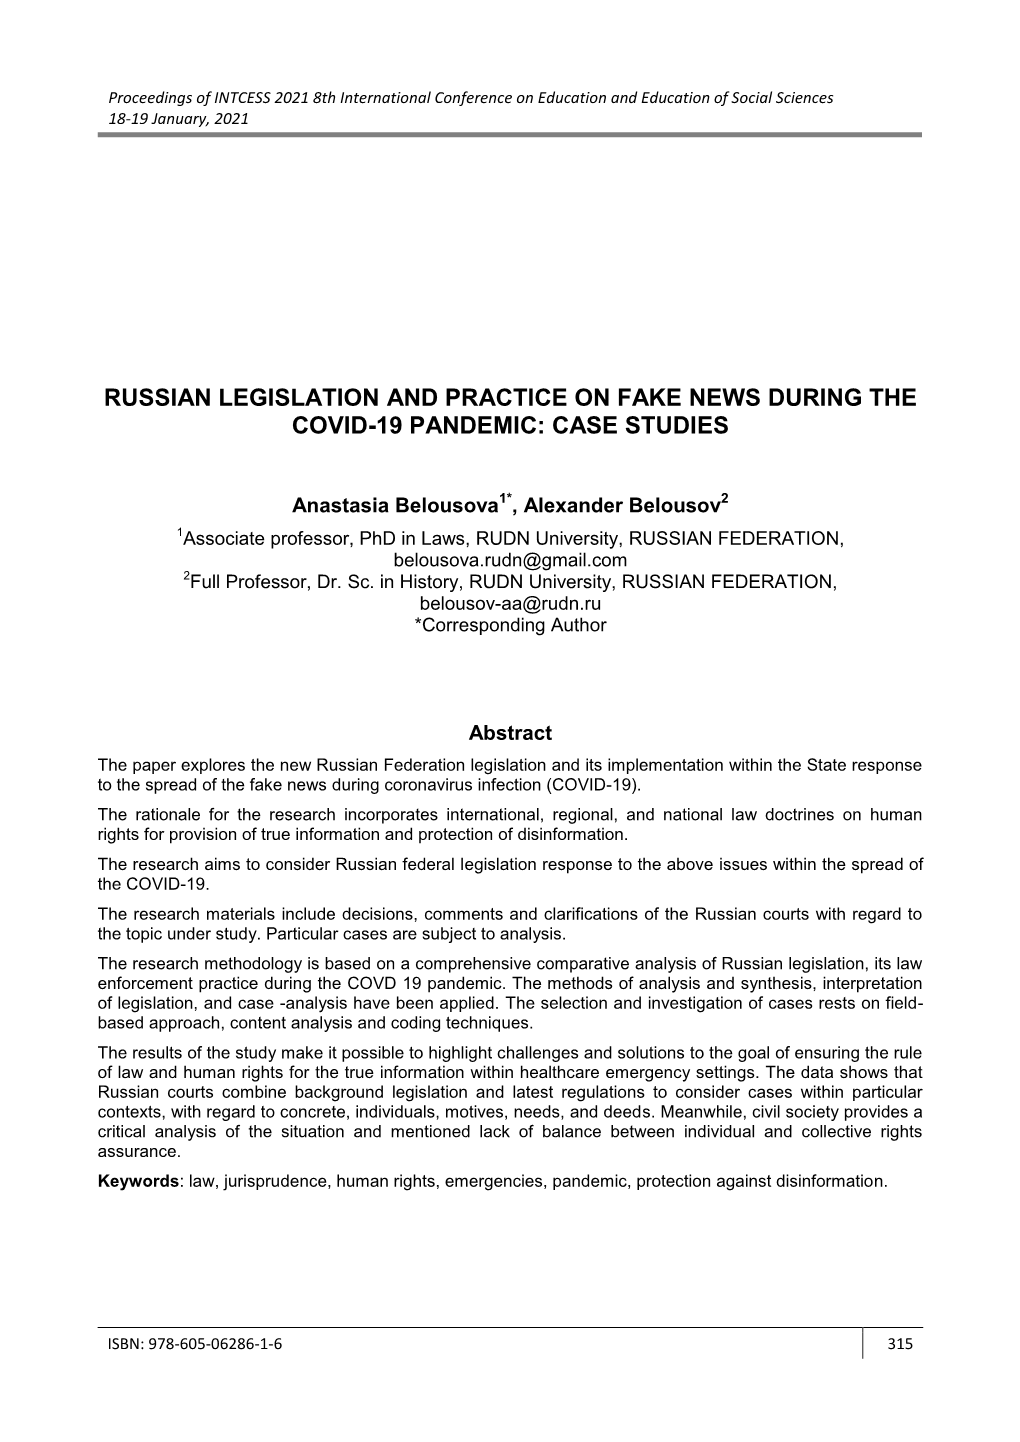 Russian Legislation and Practice on Fake News During the Covid-19 Pandemic: Case Studies